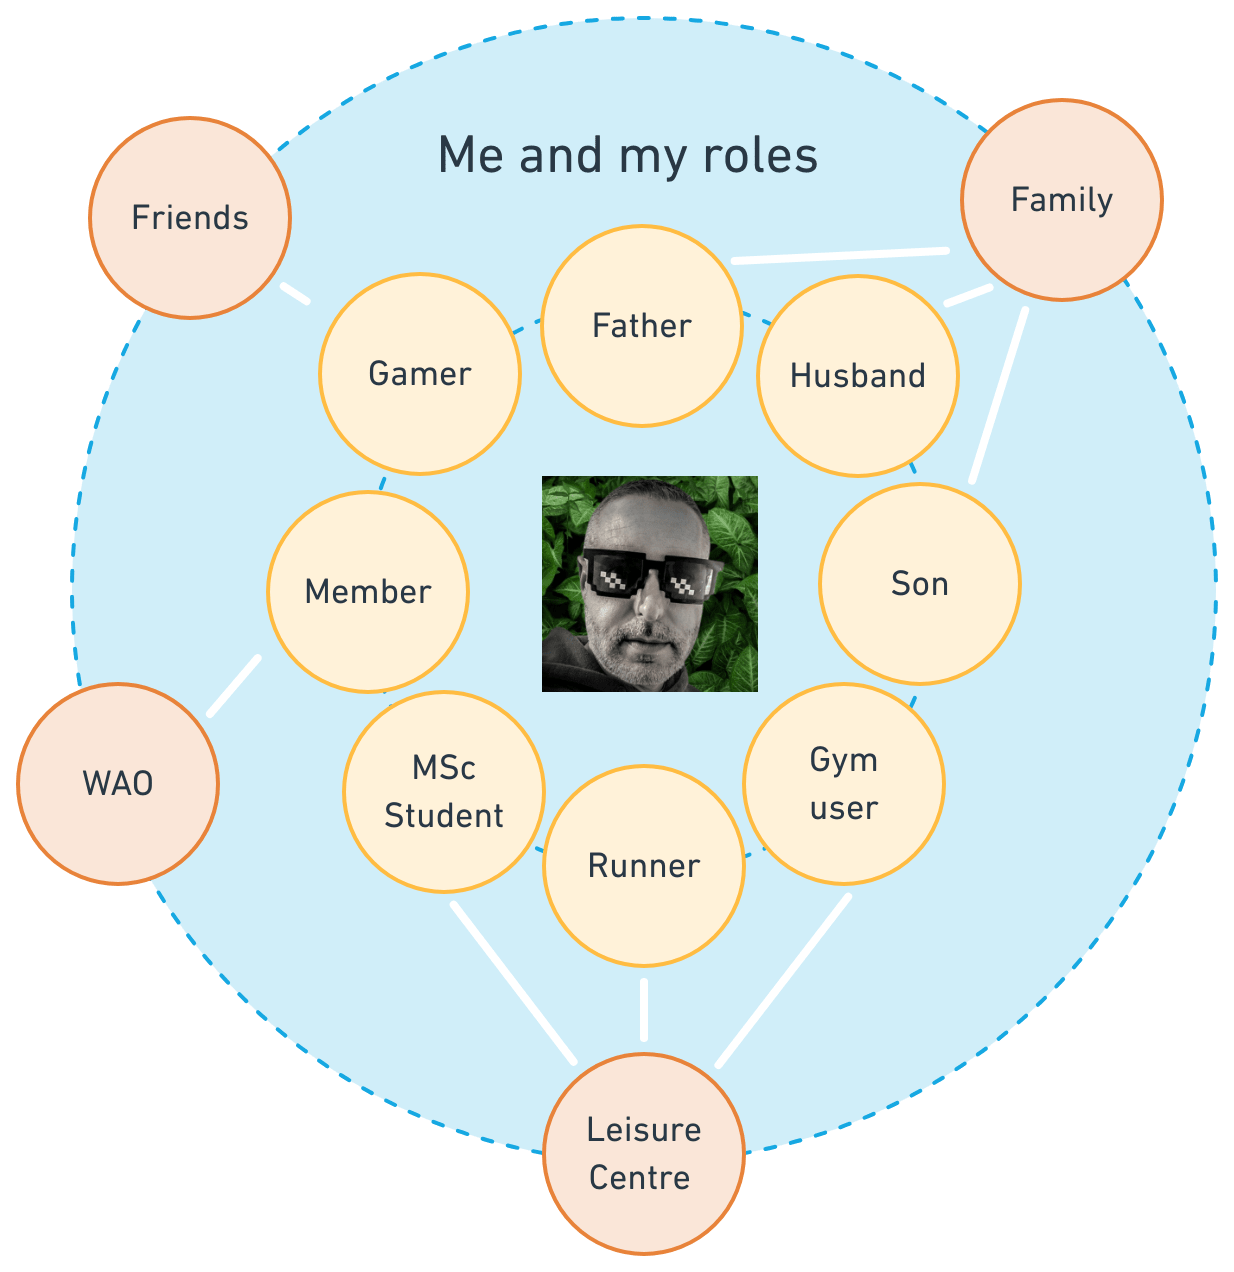 Diagram depicting various personal roles around a central photo of Doug, featuring roles like Father, Gamer, Husband, Son, etc. These are connected to other circles with titles such as Friends and Family